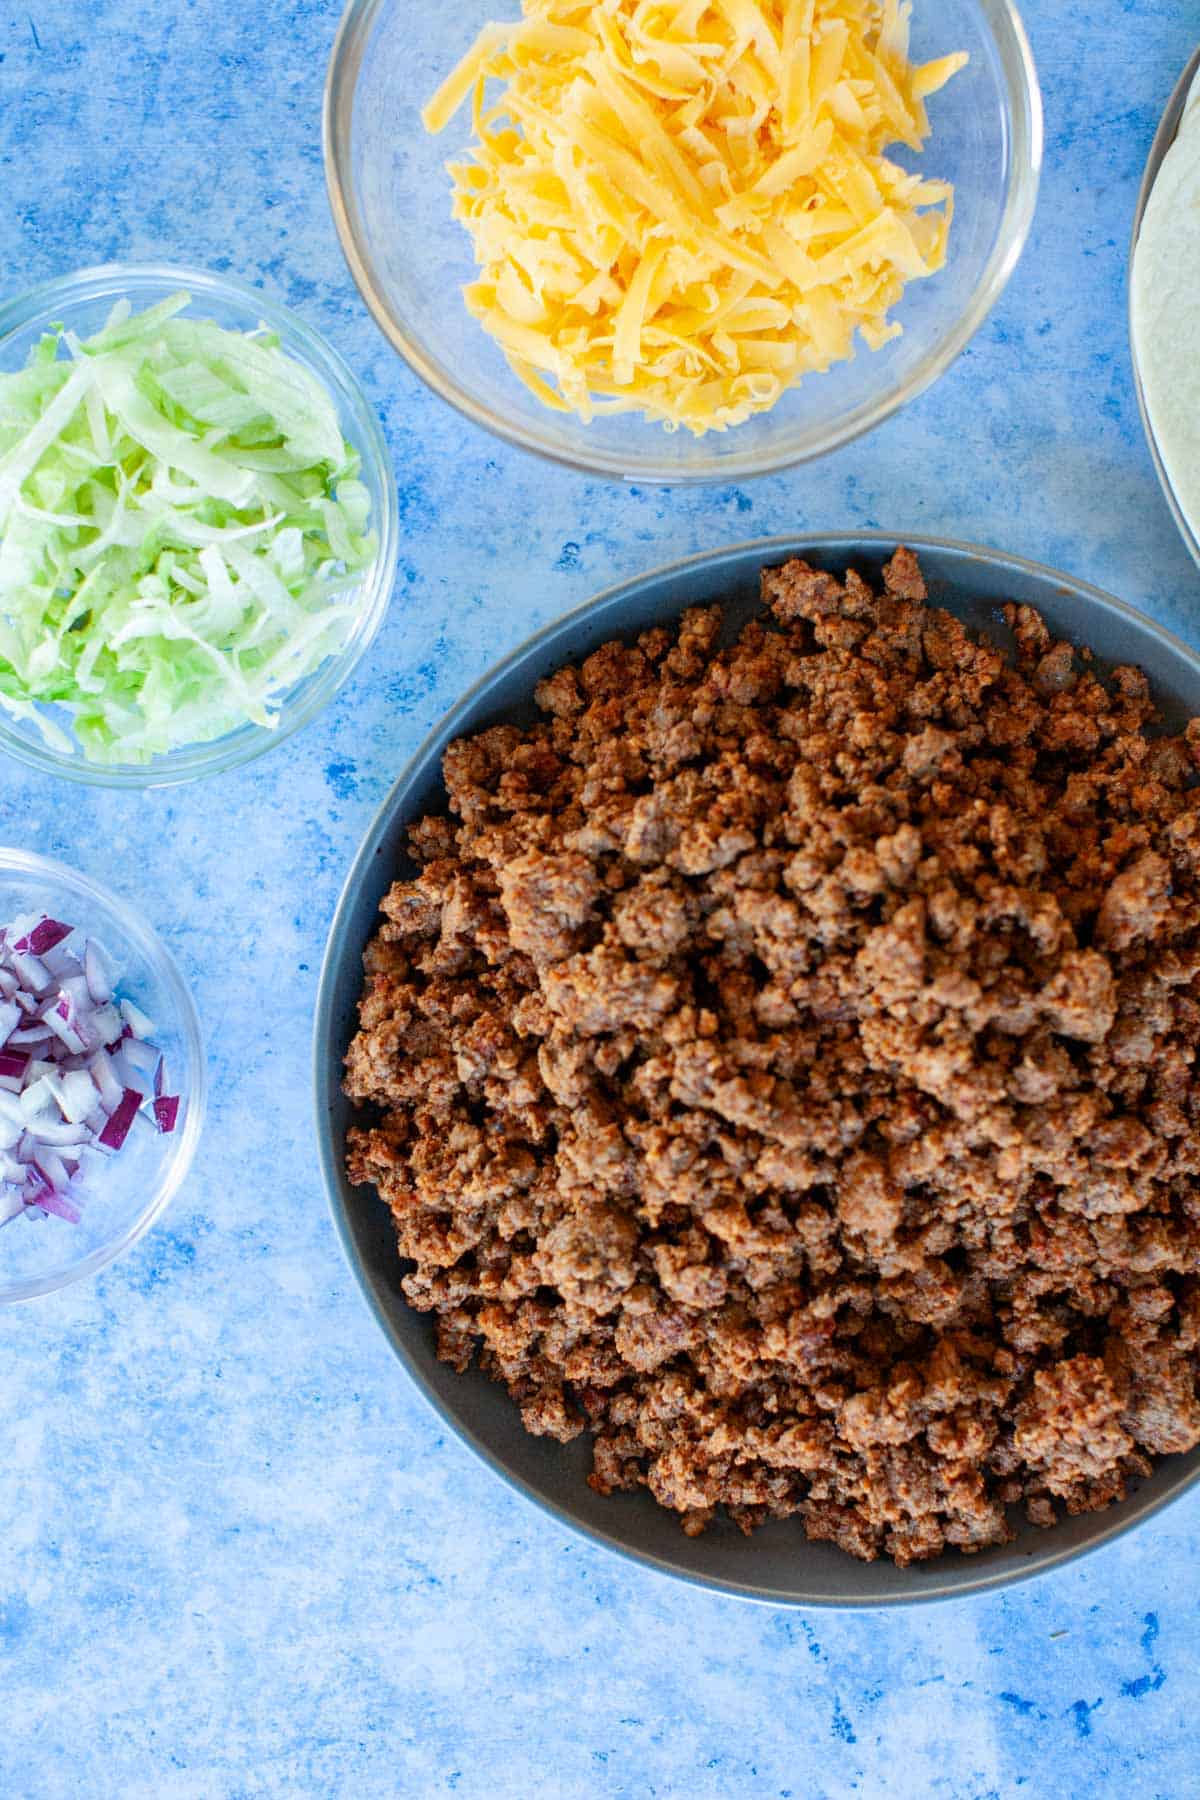 Ingredients for ground beef tacos on a blue countertop.